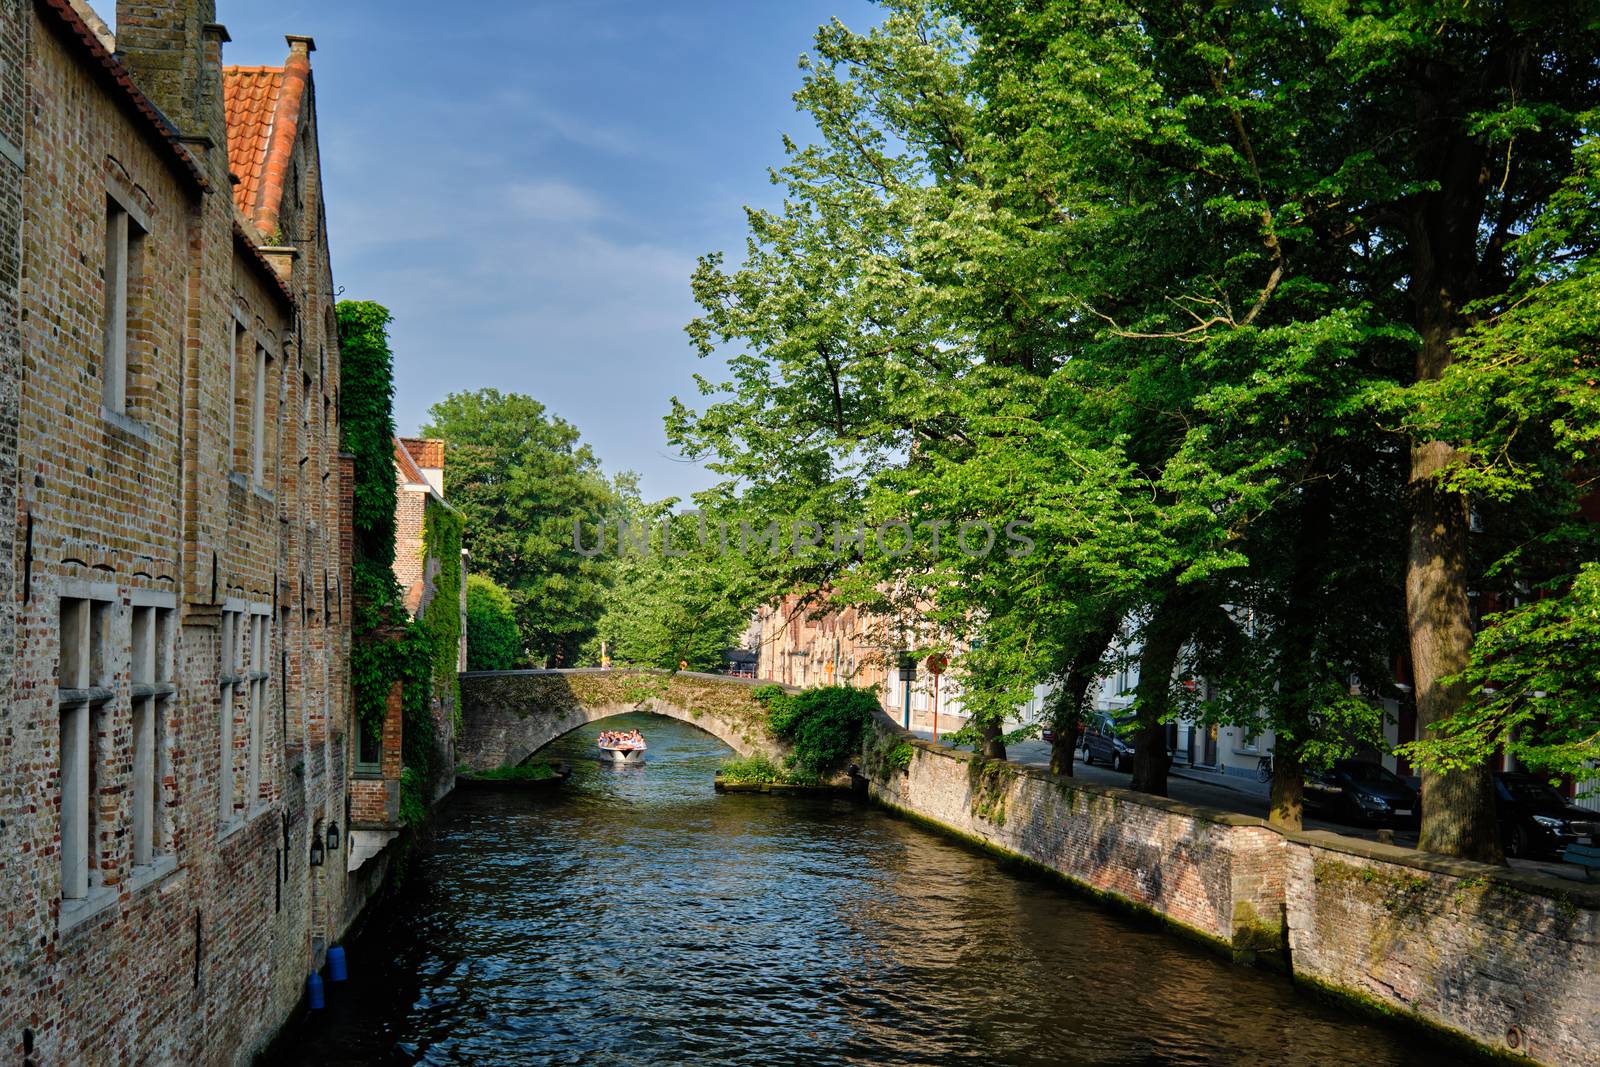 Tourist boat in canal. Brugge Bruges, Belgium by dimol